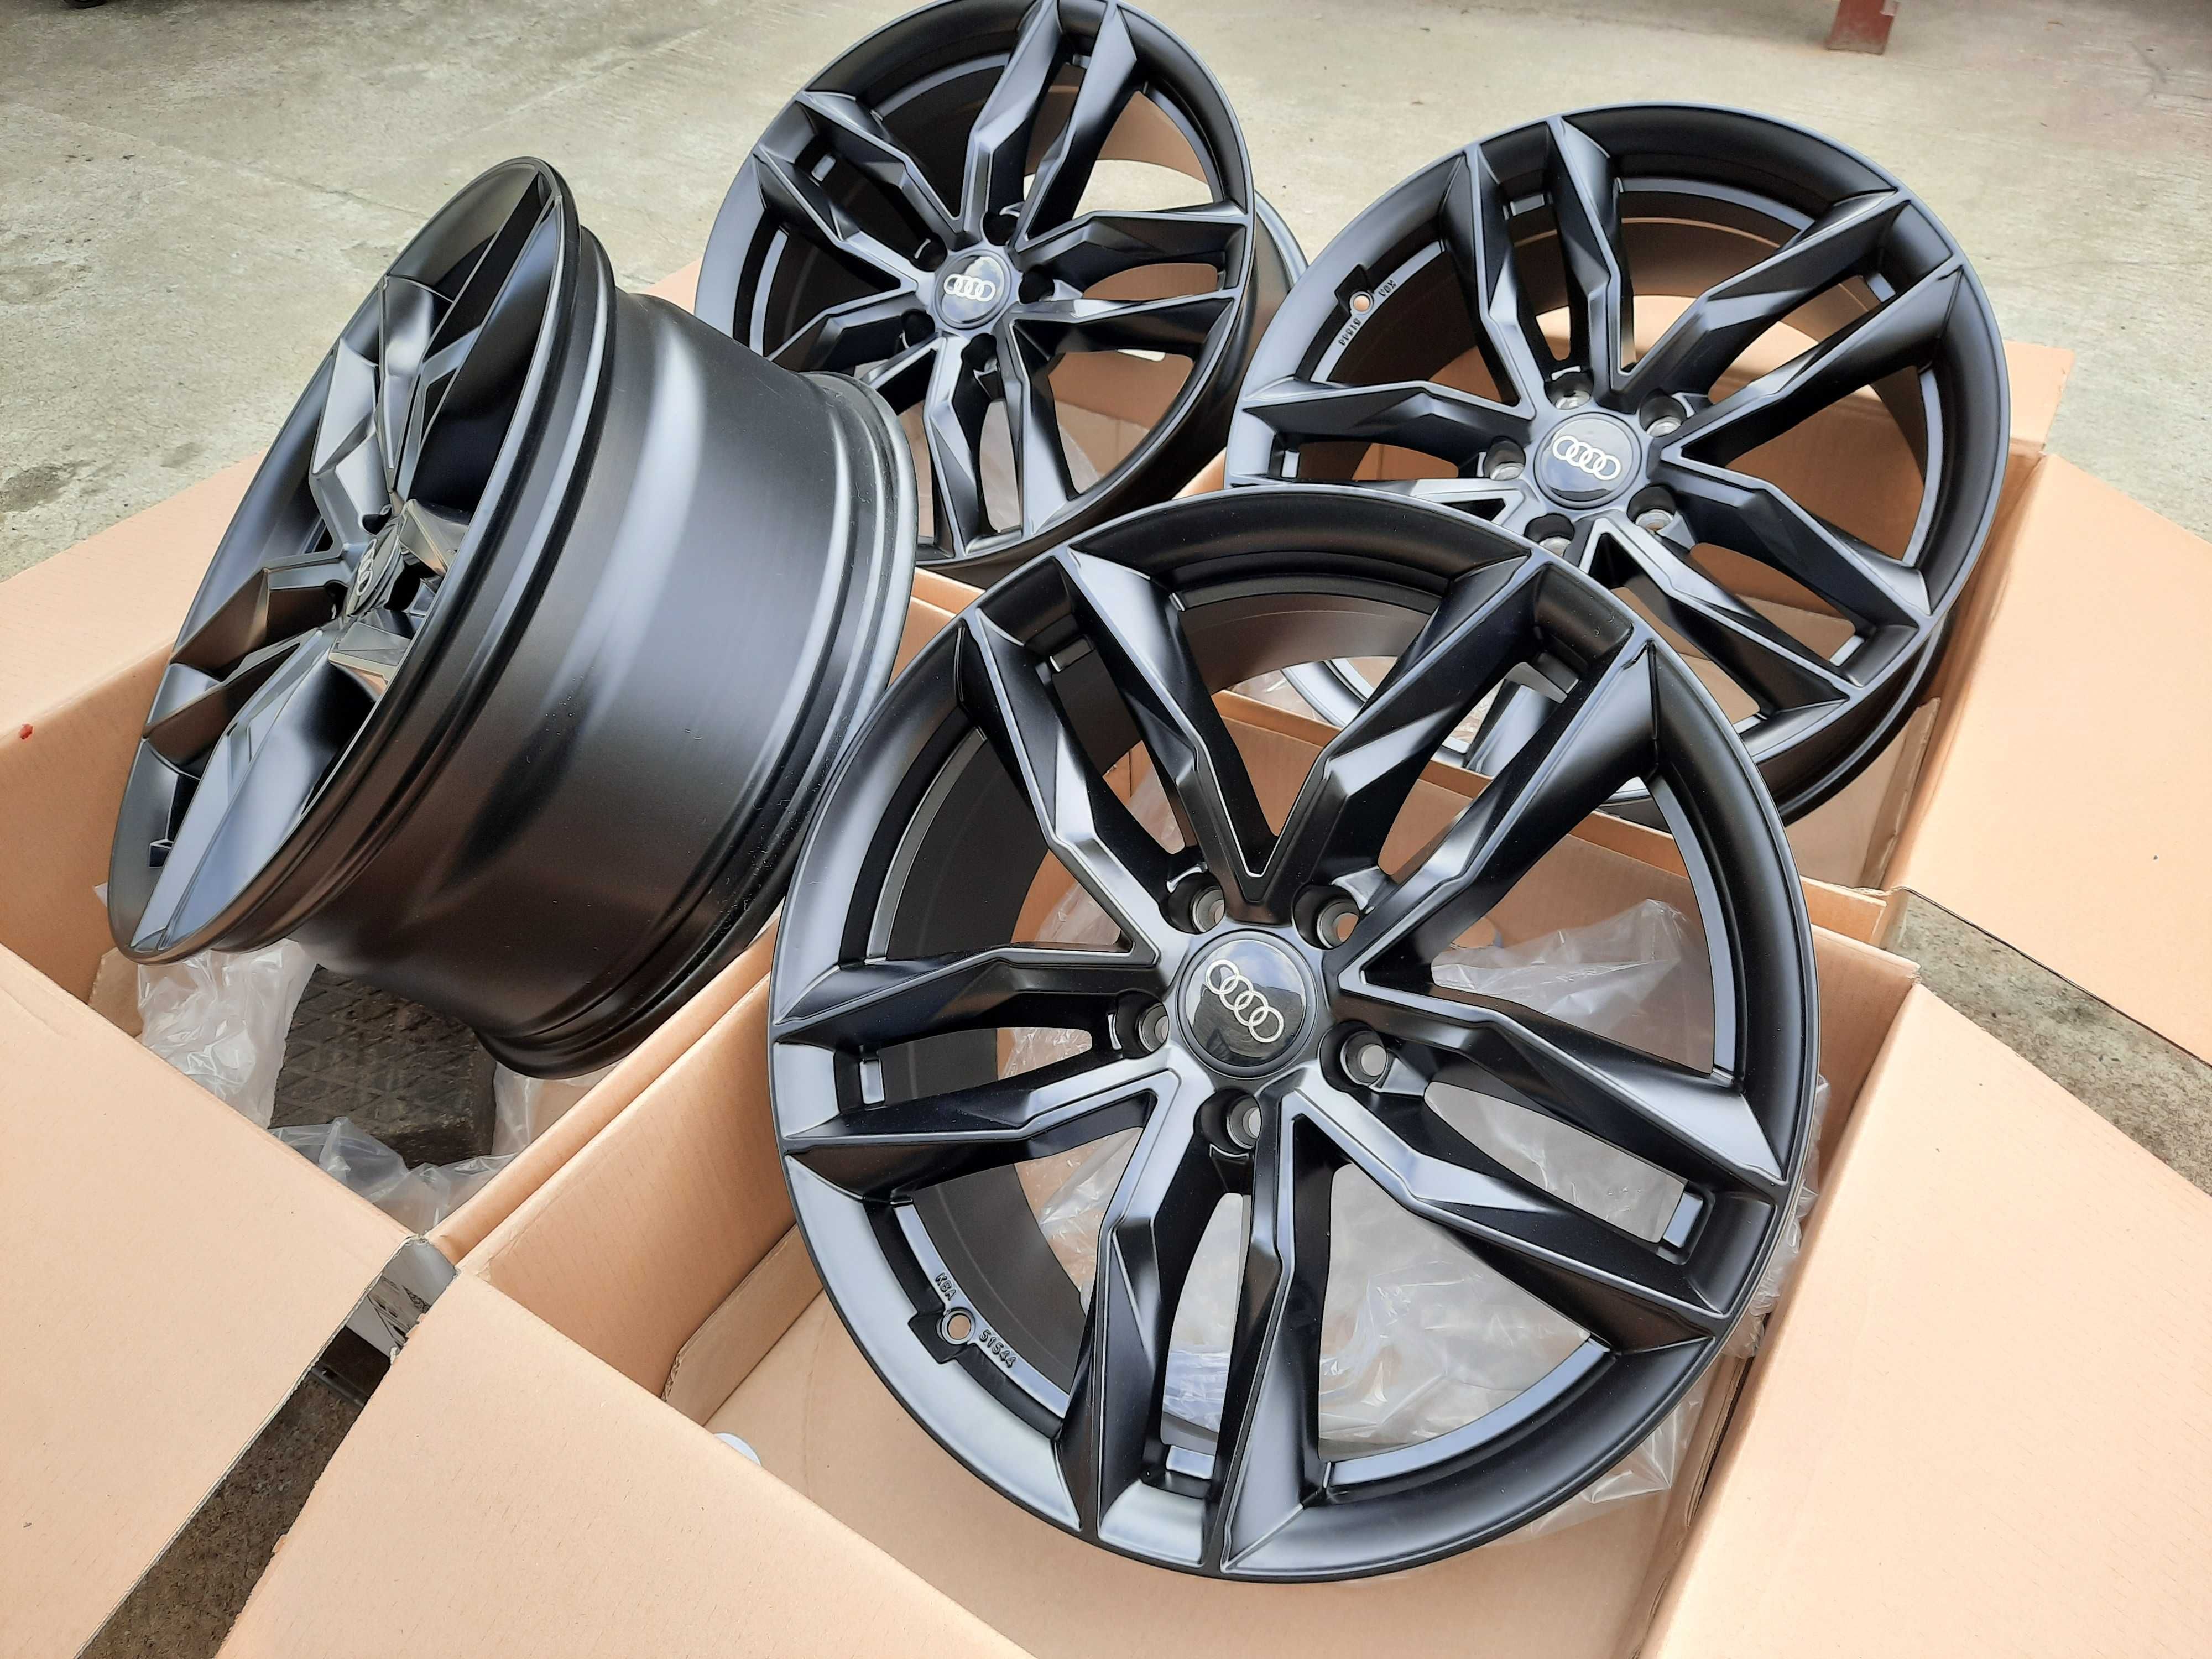 Alufelgi NOWE 18 AUDI 5x112 A3 A4 B6 B7 B8 B9 A6 C5 C6 Q3 TT BLACK RS3